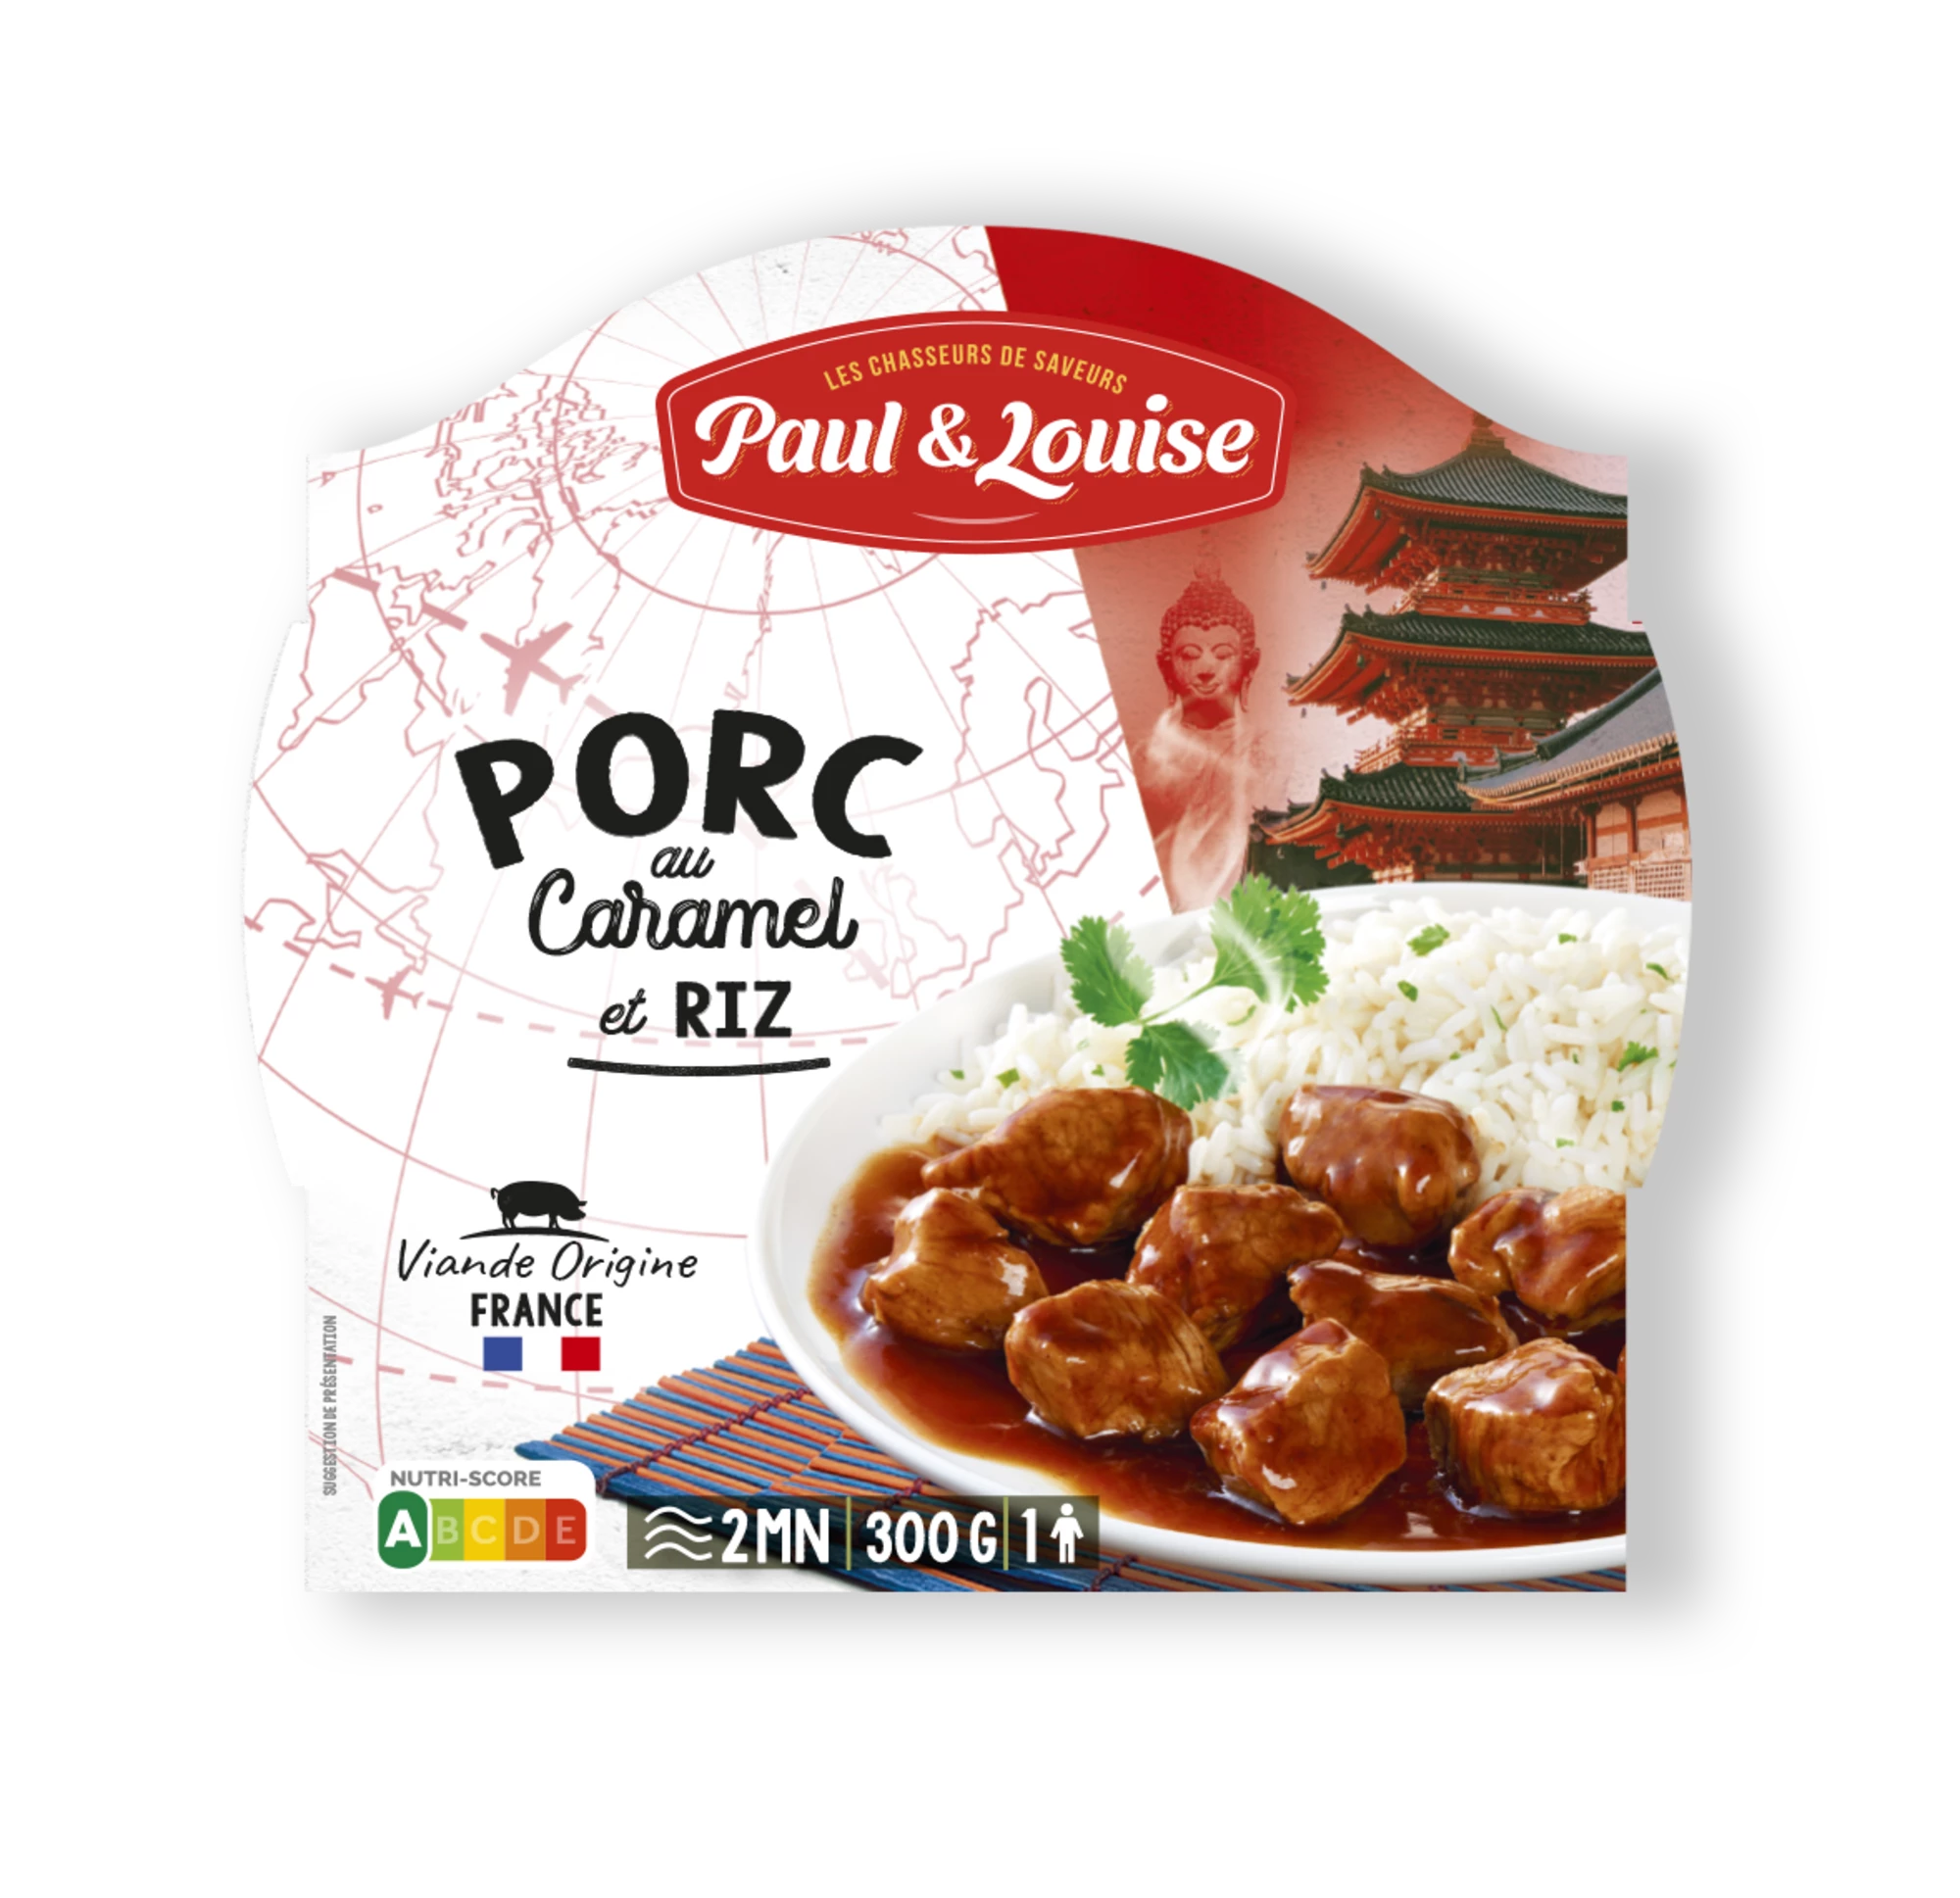 Pork with Caramel and Rice, 300g - PAUL & LOUISE